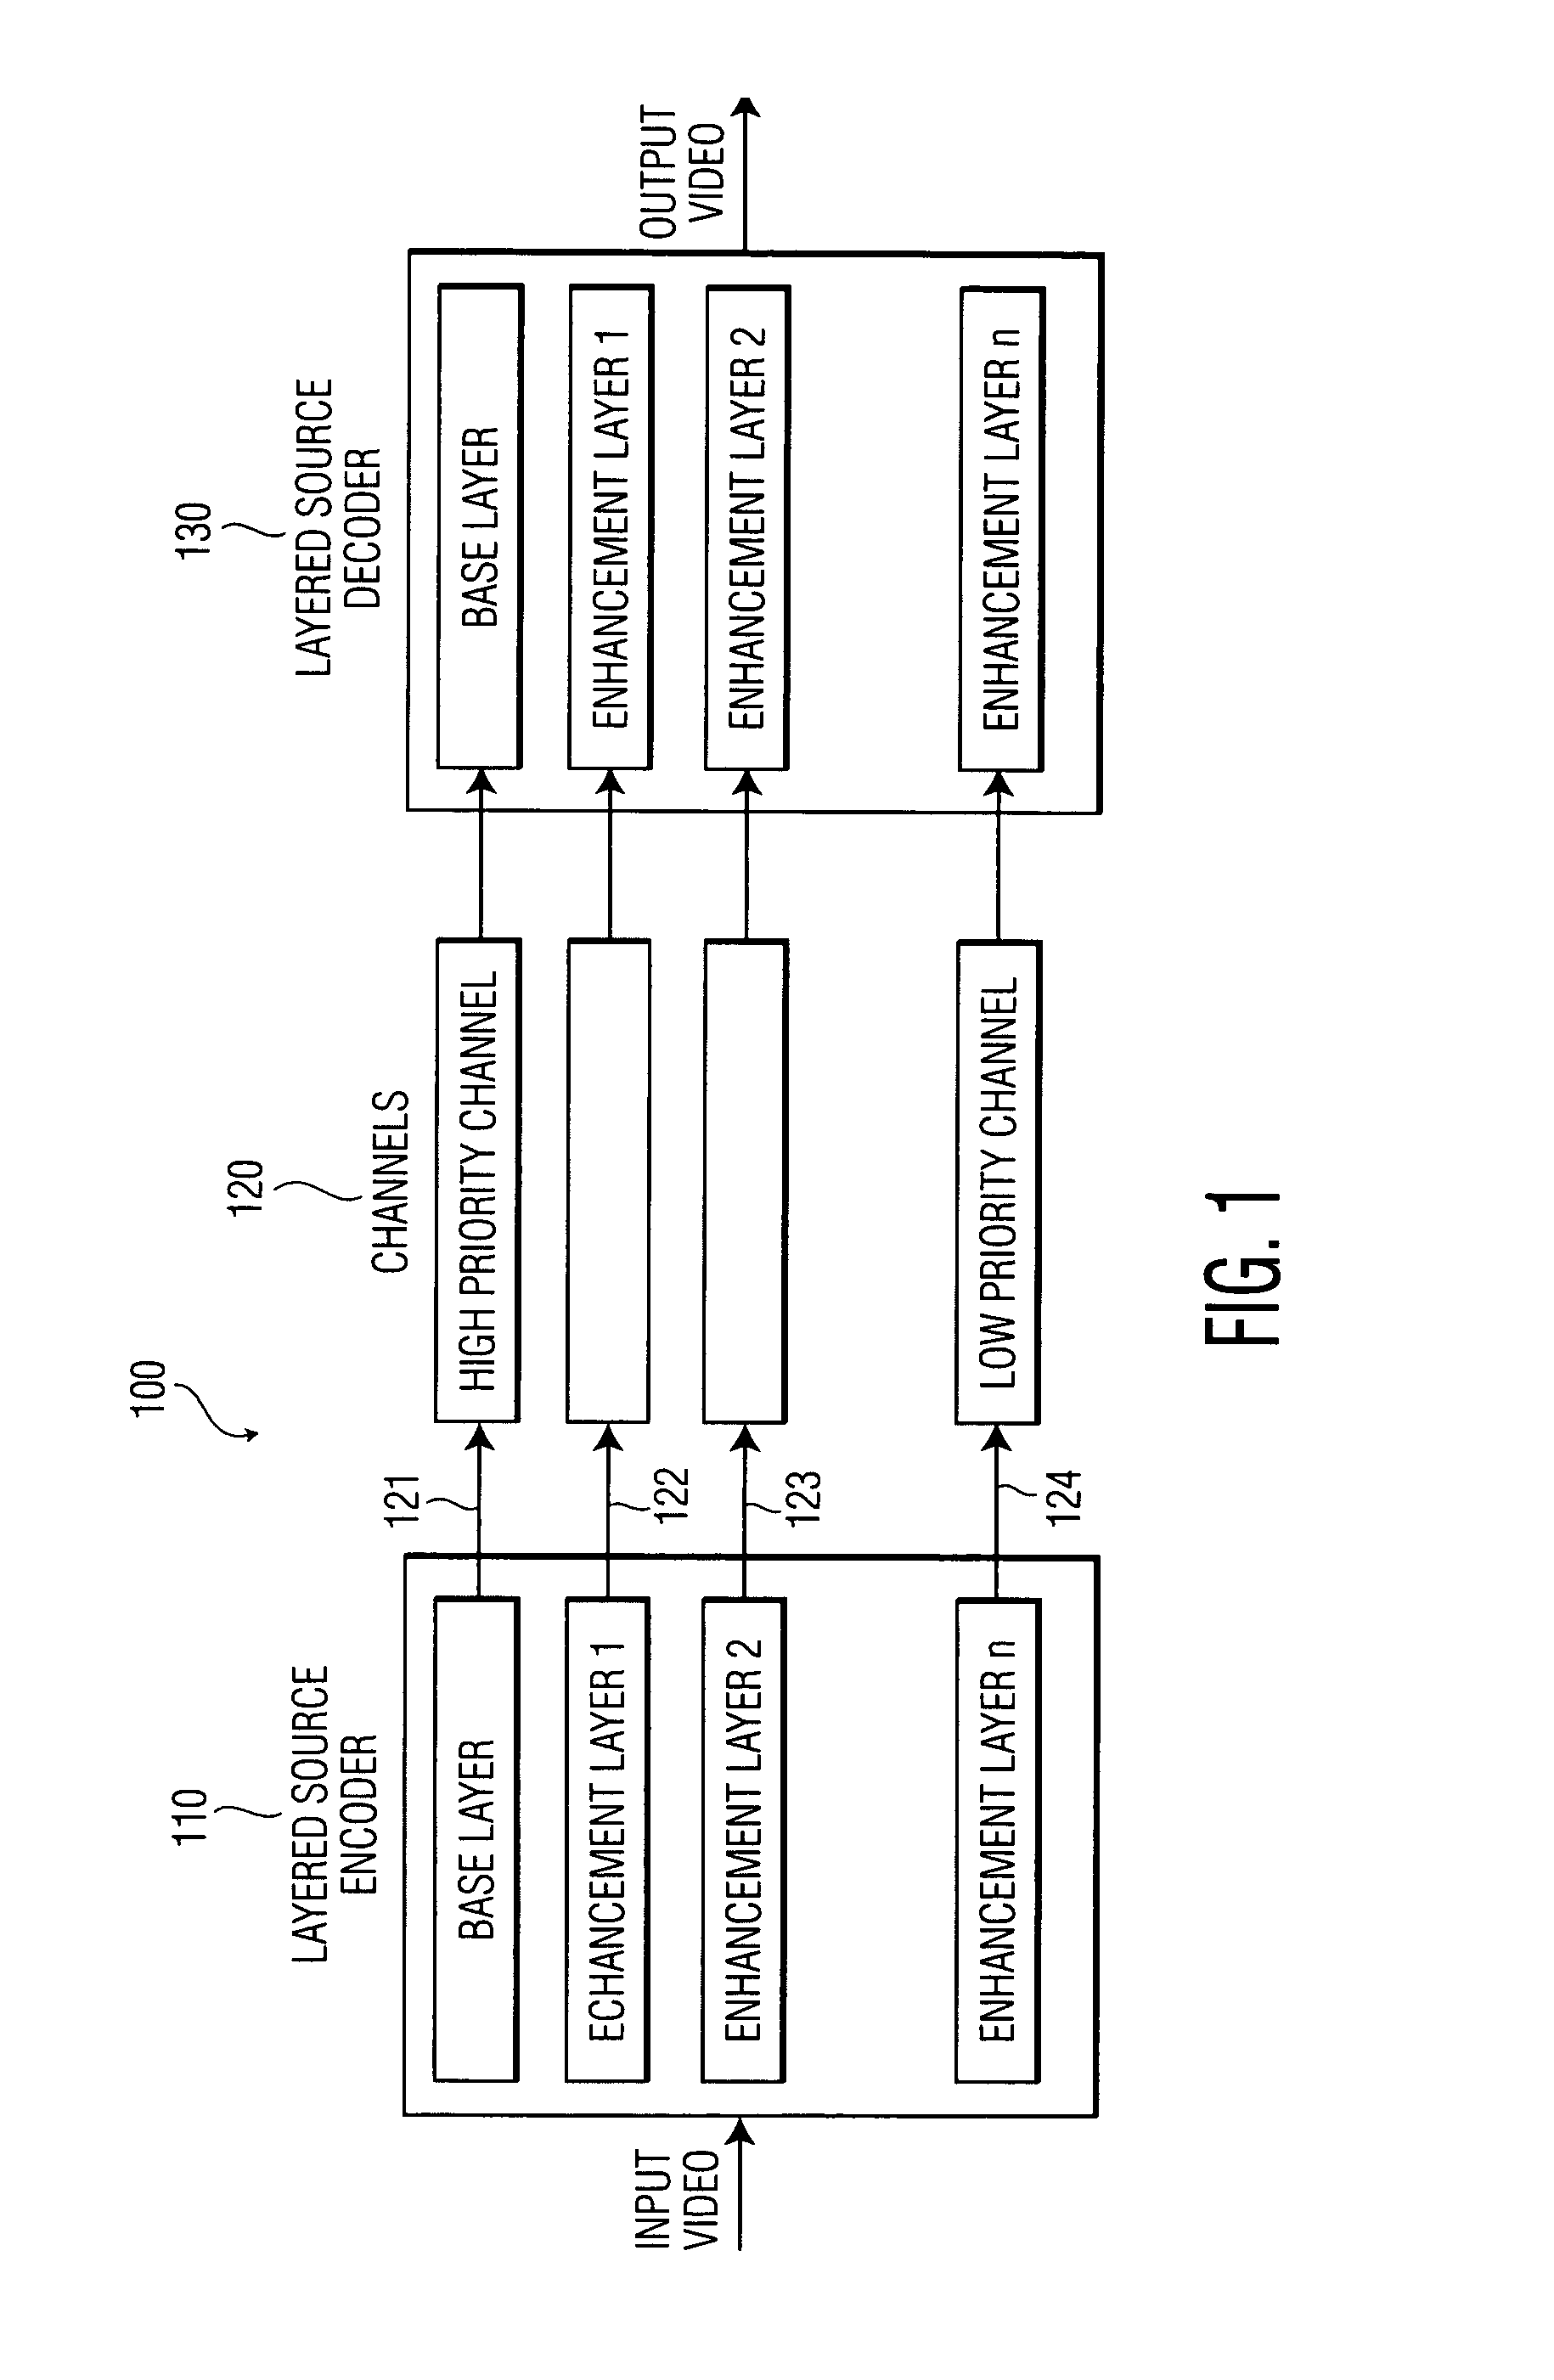 System and method for rate-distortion optimized data partitioning for video coding using backward adaptation